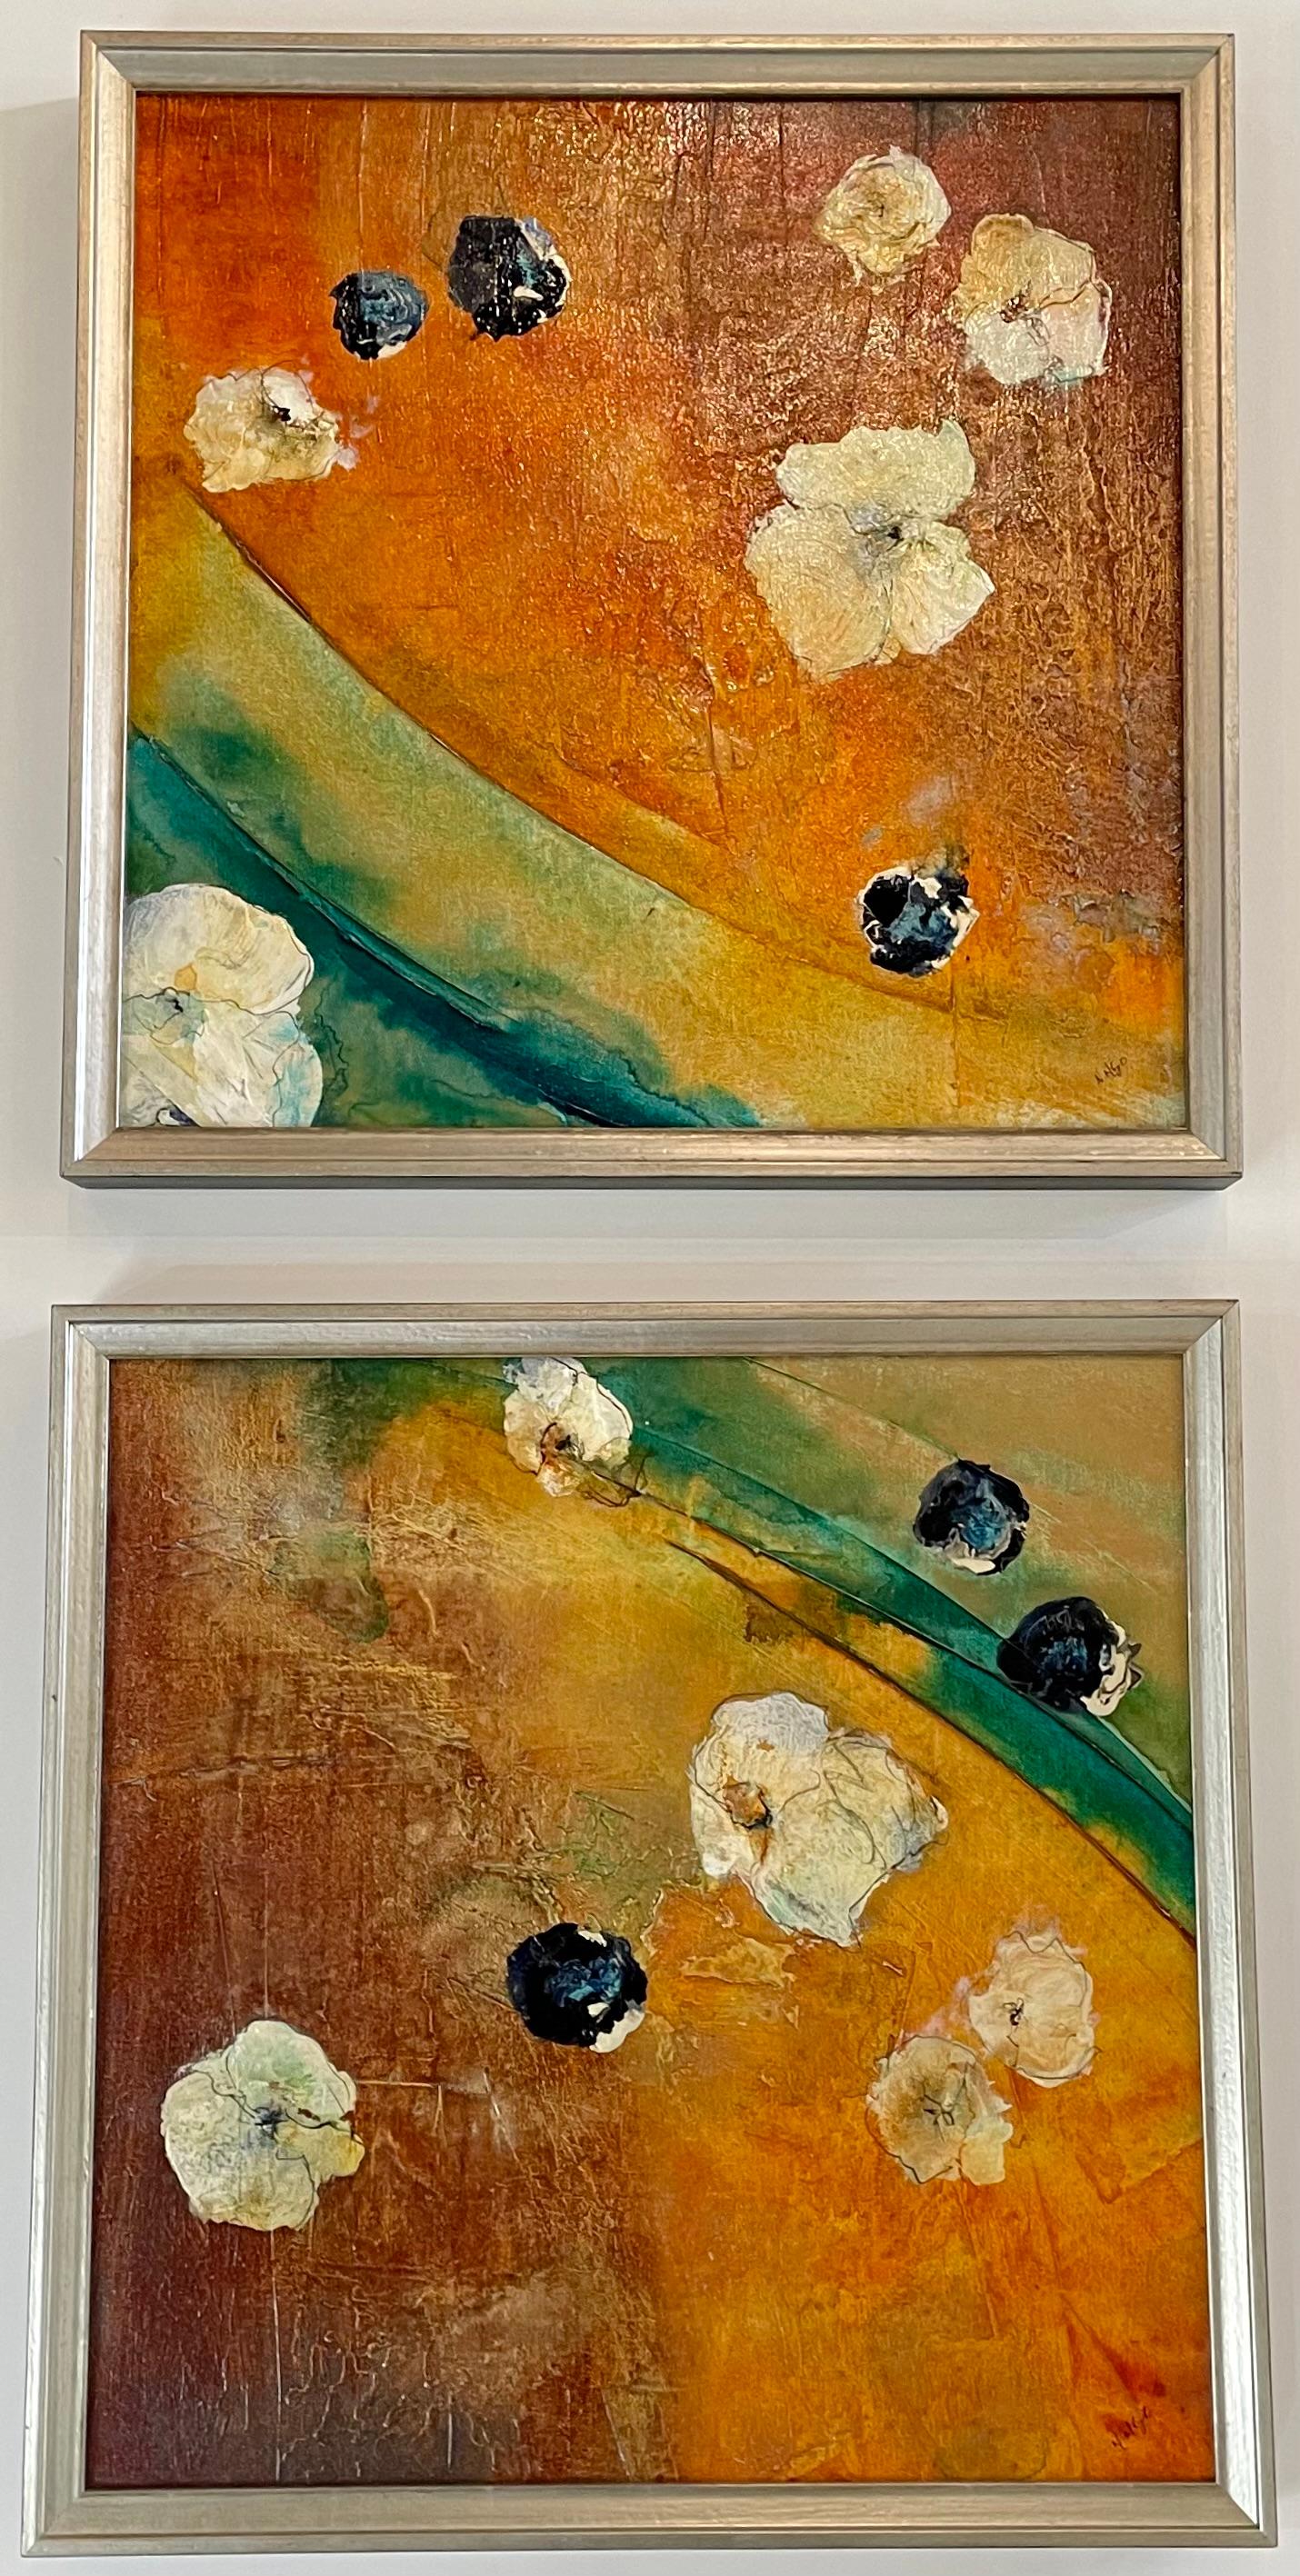 Nancy Ngo Abstract Painting - "Floating Flowers I & II" - Highly Textured, Abstract Florals on Canvas